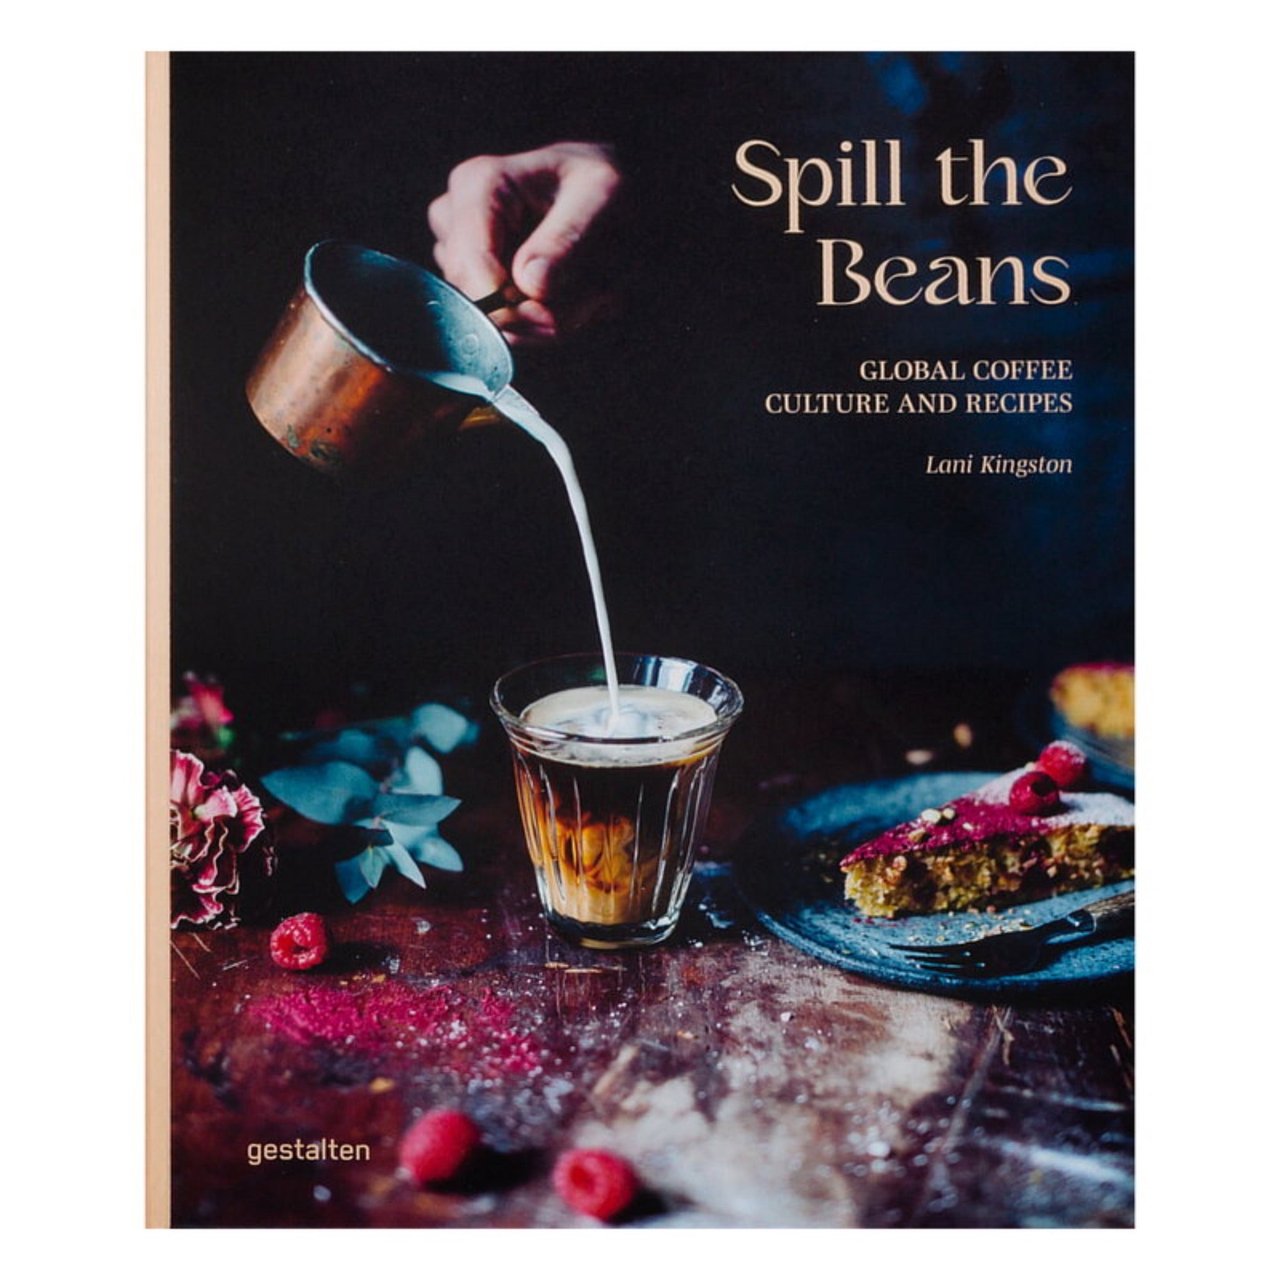 3 Spill the Beans: Global Coffee Culture and Recipes